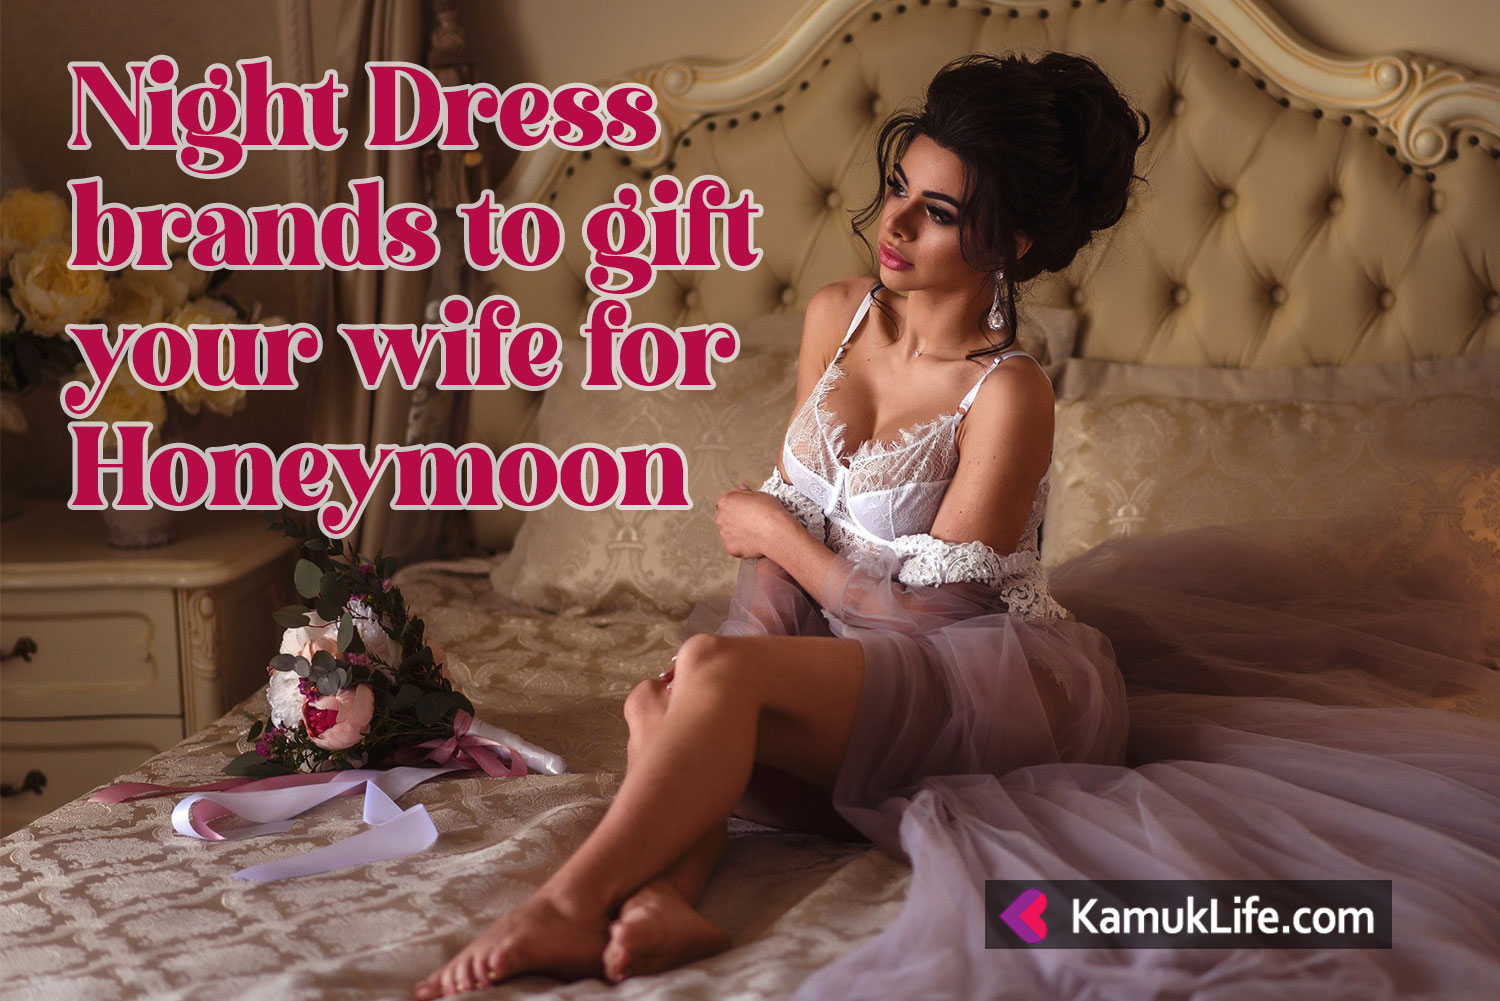 Which brand nightdress for honeymoon should I give as a gift to my wife?